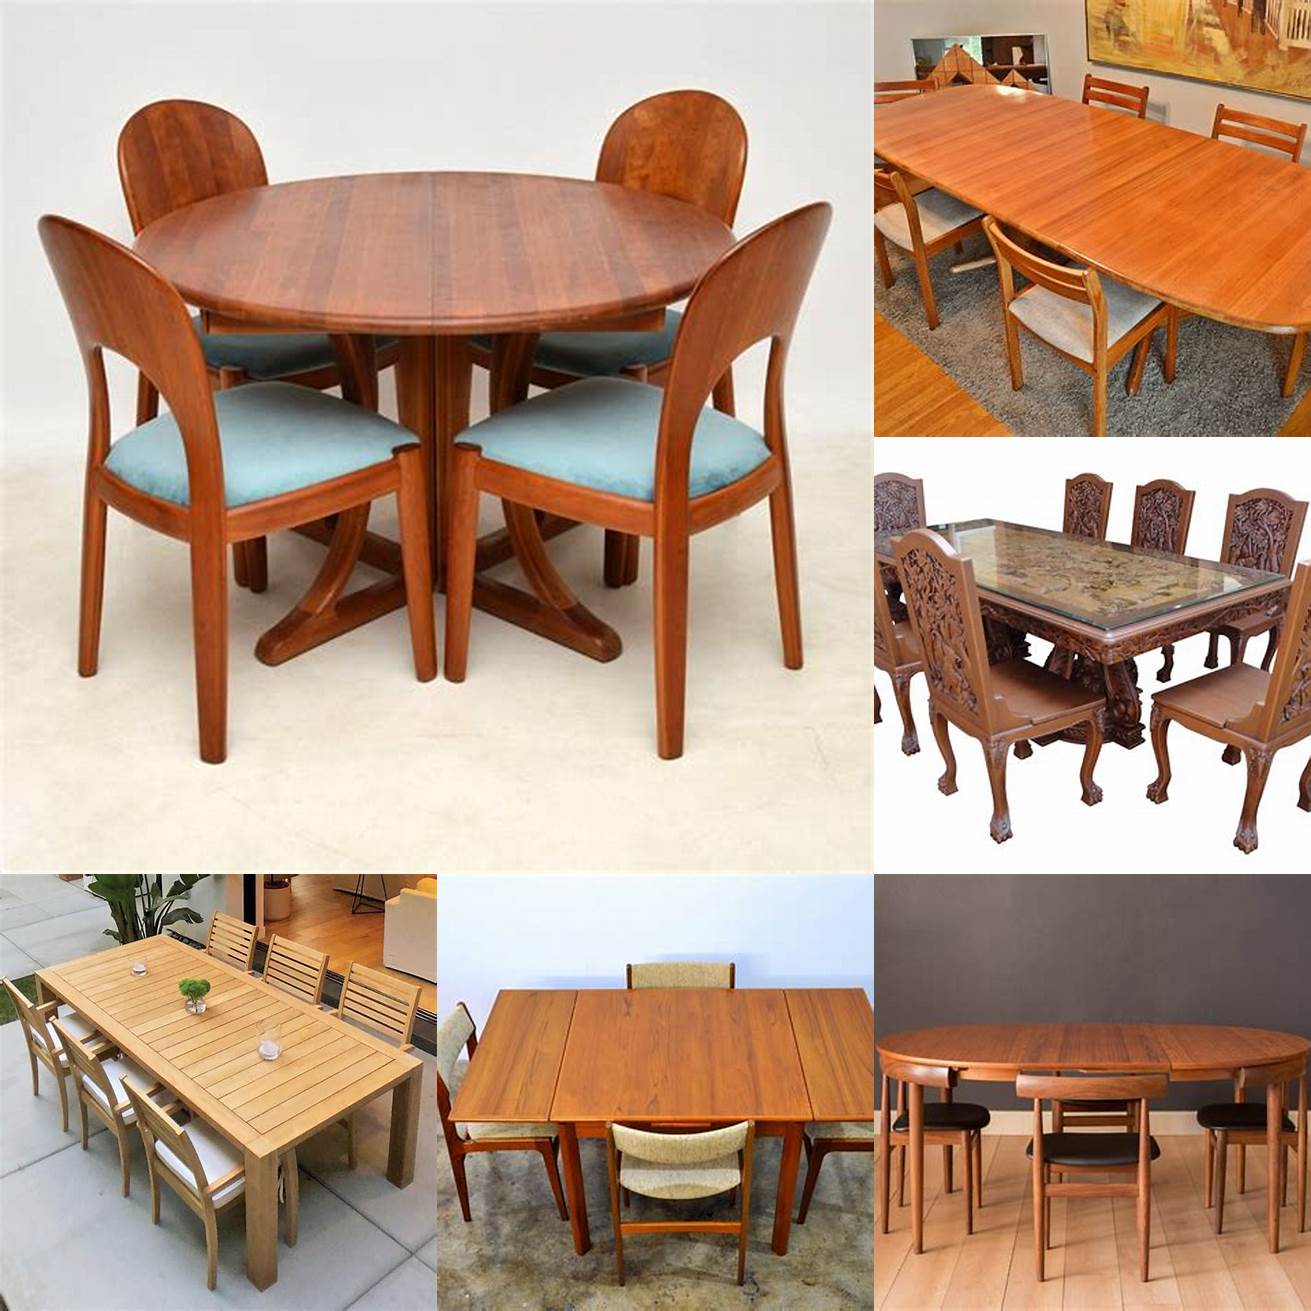 Teak Dining Room Table and Chairs